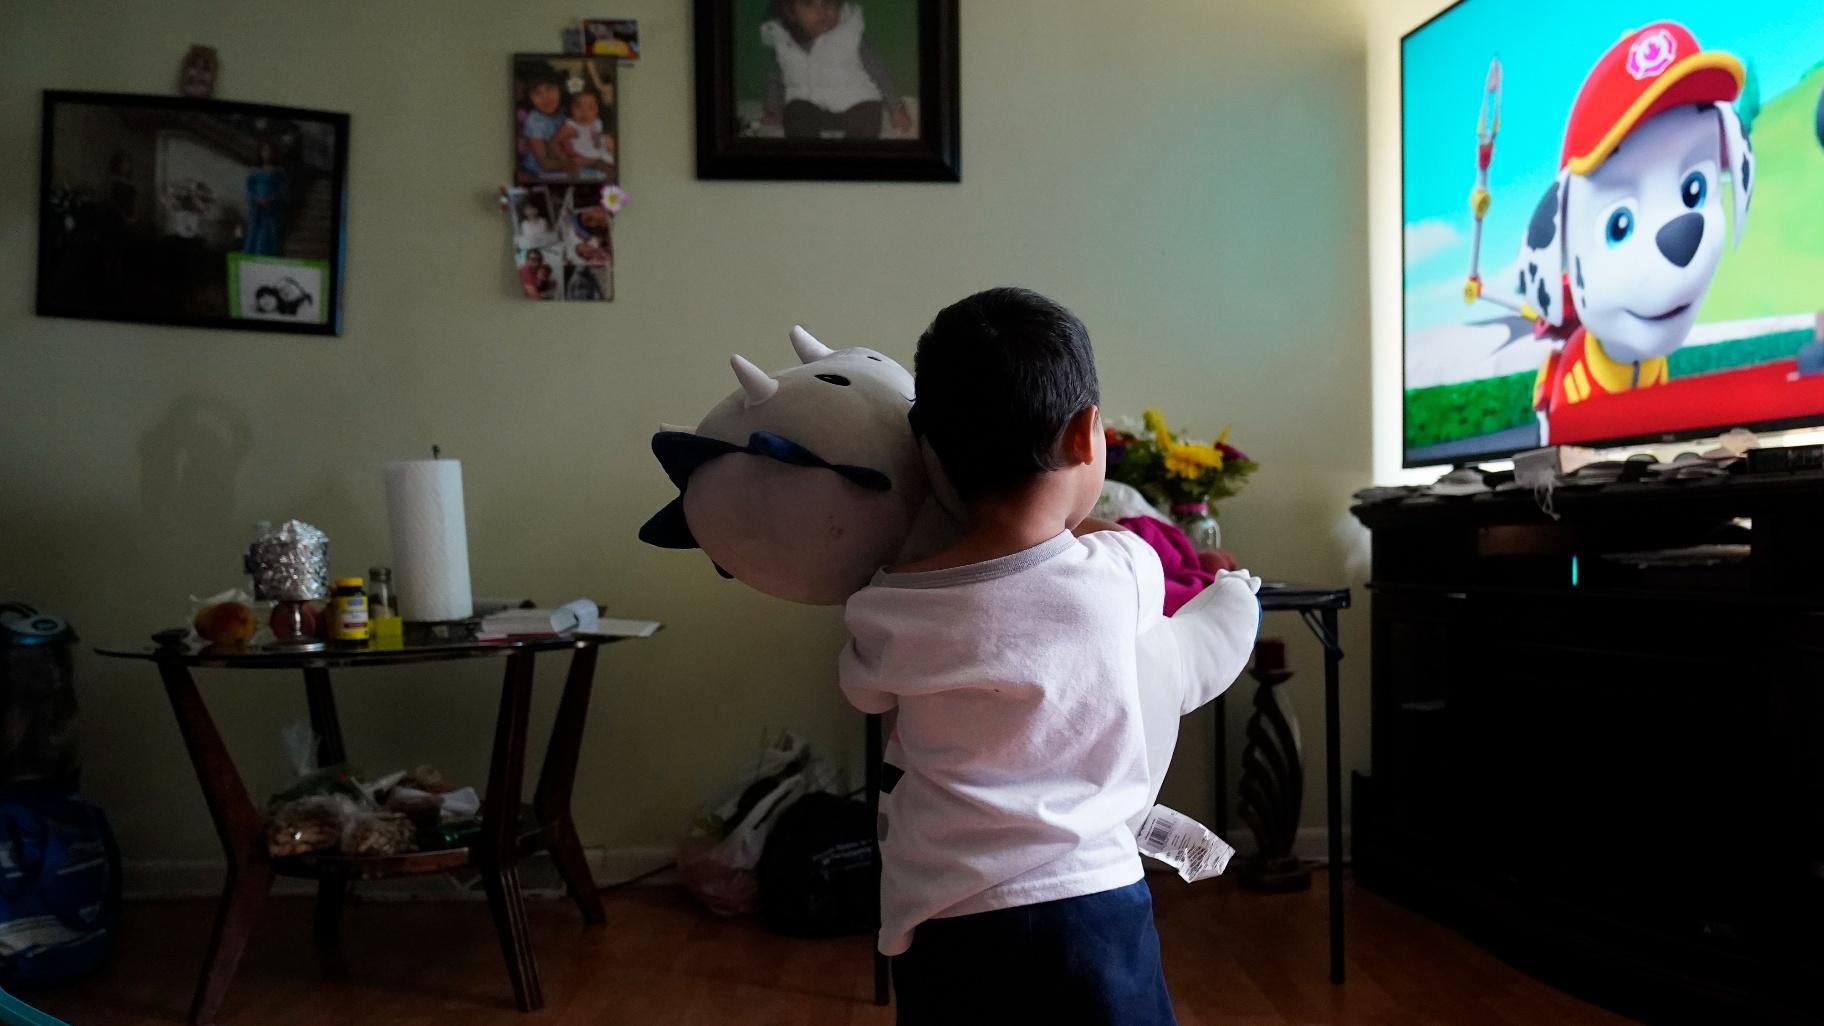 Alexander, 3, who is being treated for developmental delays, holds a stuffed animal and watches Paw Patrol in the living room of his West Chicago, Ill., home Tuesday, Aug. 8, 2023. (AP Photo / Charles Rex Arbogast)